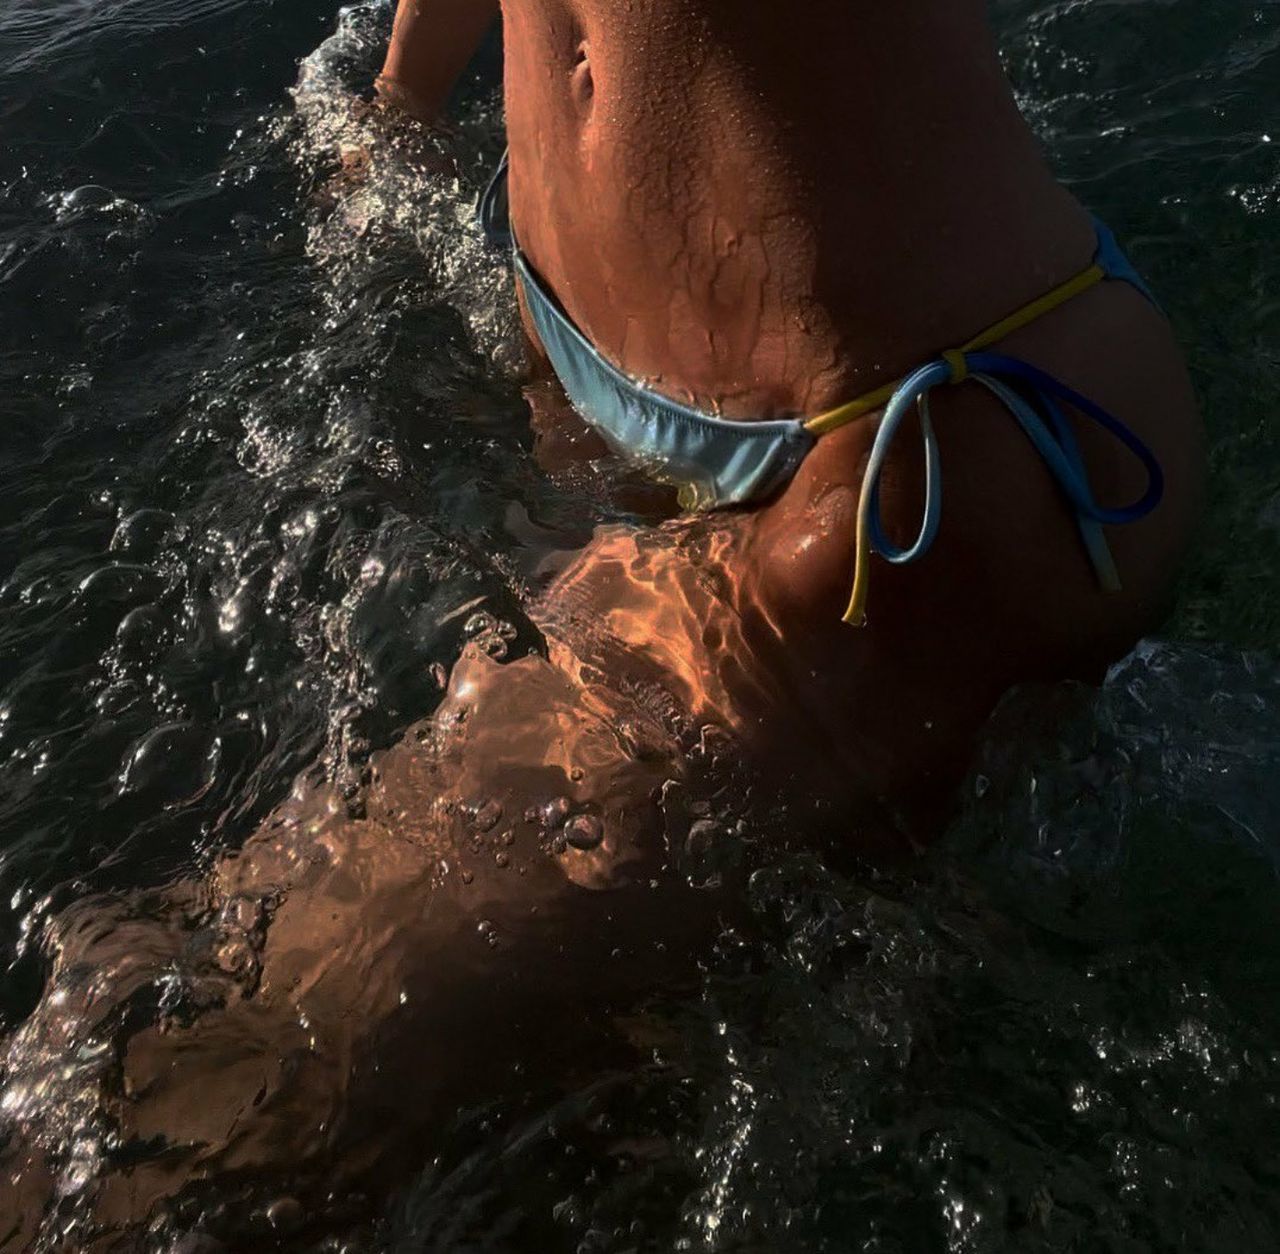 swimming, water, one person, sea, nature, sports, adult, lifestyles, leisure activity, water sports, wave, vacation, holiday, trip, outdoors, human leg, adventure, swimwear, underwater, low section, men, high angle view, day, motion, scuba diving, women